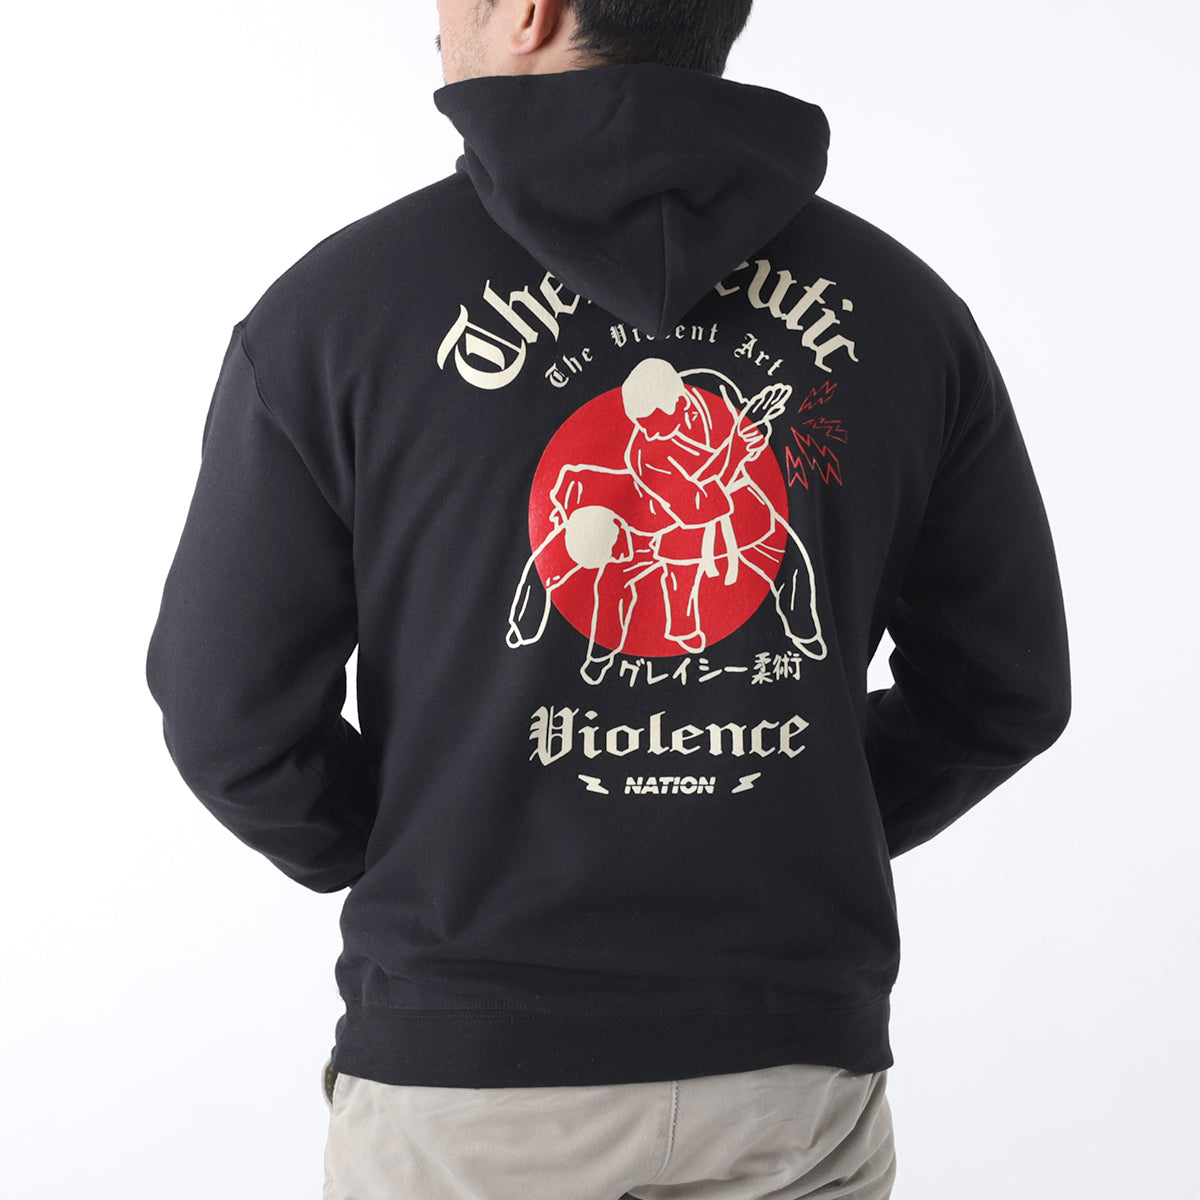 Nation Athletic "Therapeutic Violence" Hoodie